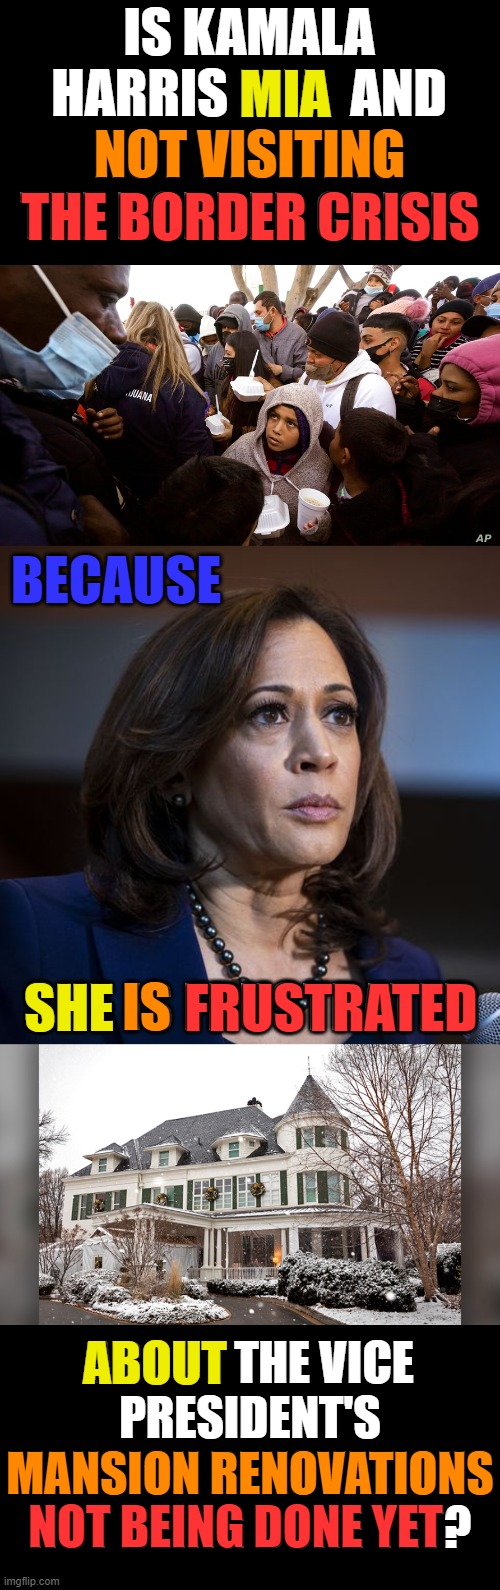 Your Actions Show What's Really Important To You | IS KAMALA HARRIS MIA  AND NOT VISITING THE BORDER CRISIS; MIA; NOT VISITING; THE BORDER CRISIS; BECAUSE; IS; SHE IS FRUSTRATED; SHE; FRUSTRATED; ABOUT THE VICE PRESIDENT'S MANSION RENOVATIONS NOT BEING DONE YET? ABOUT; MANSION RENOVATIONS; NOT BEING DONE YET | image tagged in politics,kamala harris,border,who cares,mansion,frustrated | made w/ Imgflip meme maker